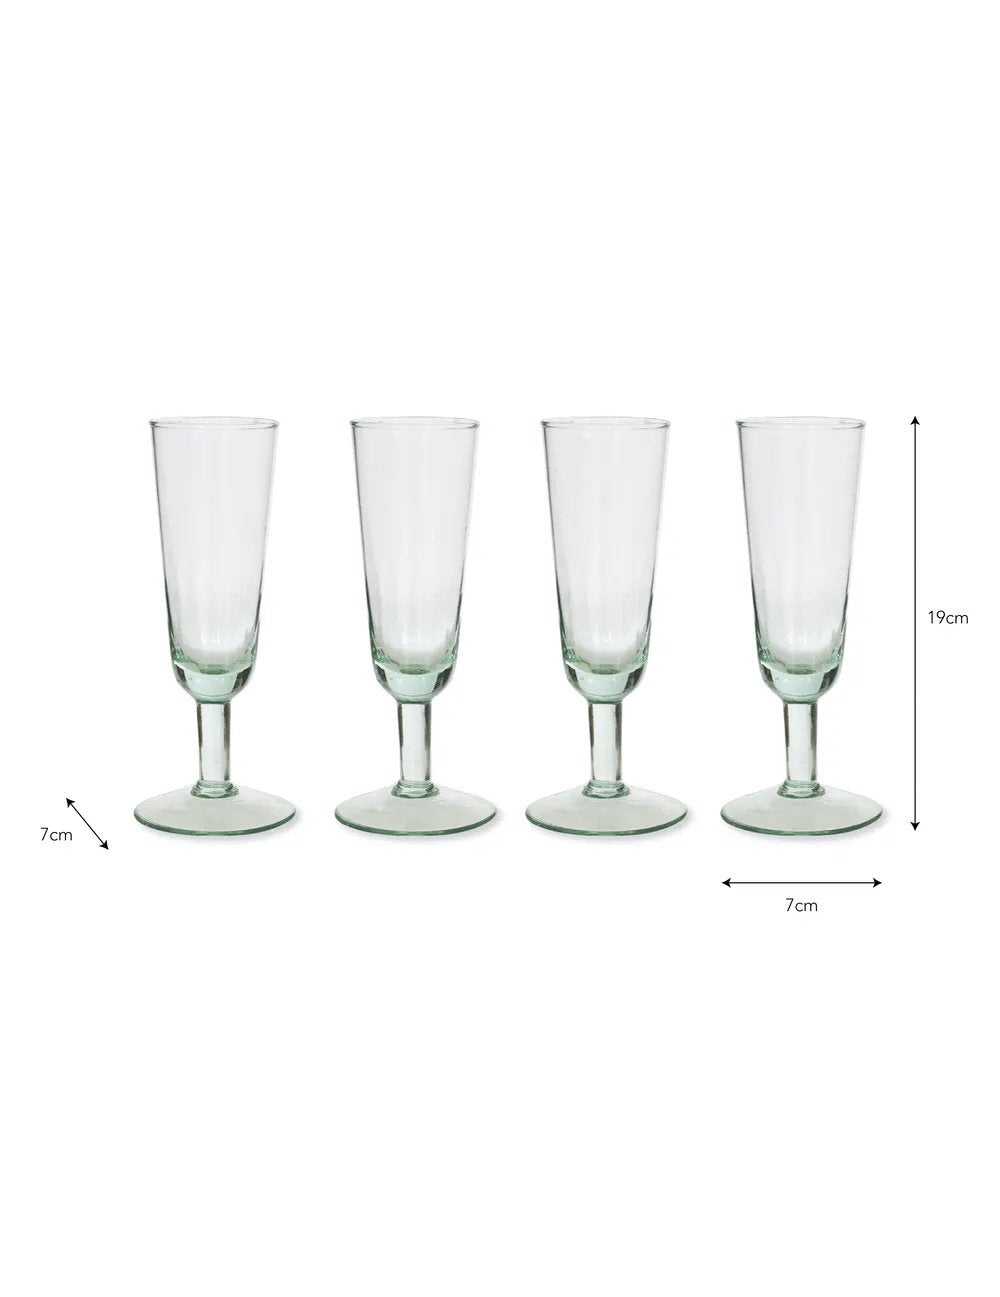 Recycled Glass Champagne Flutes - Set of 4